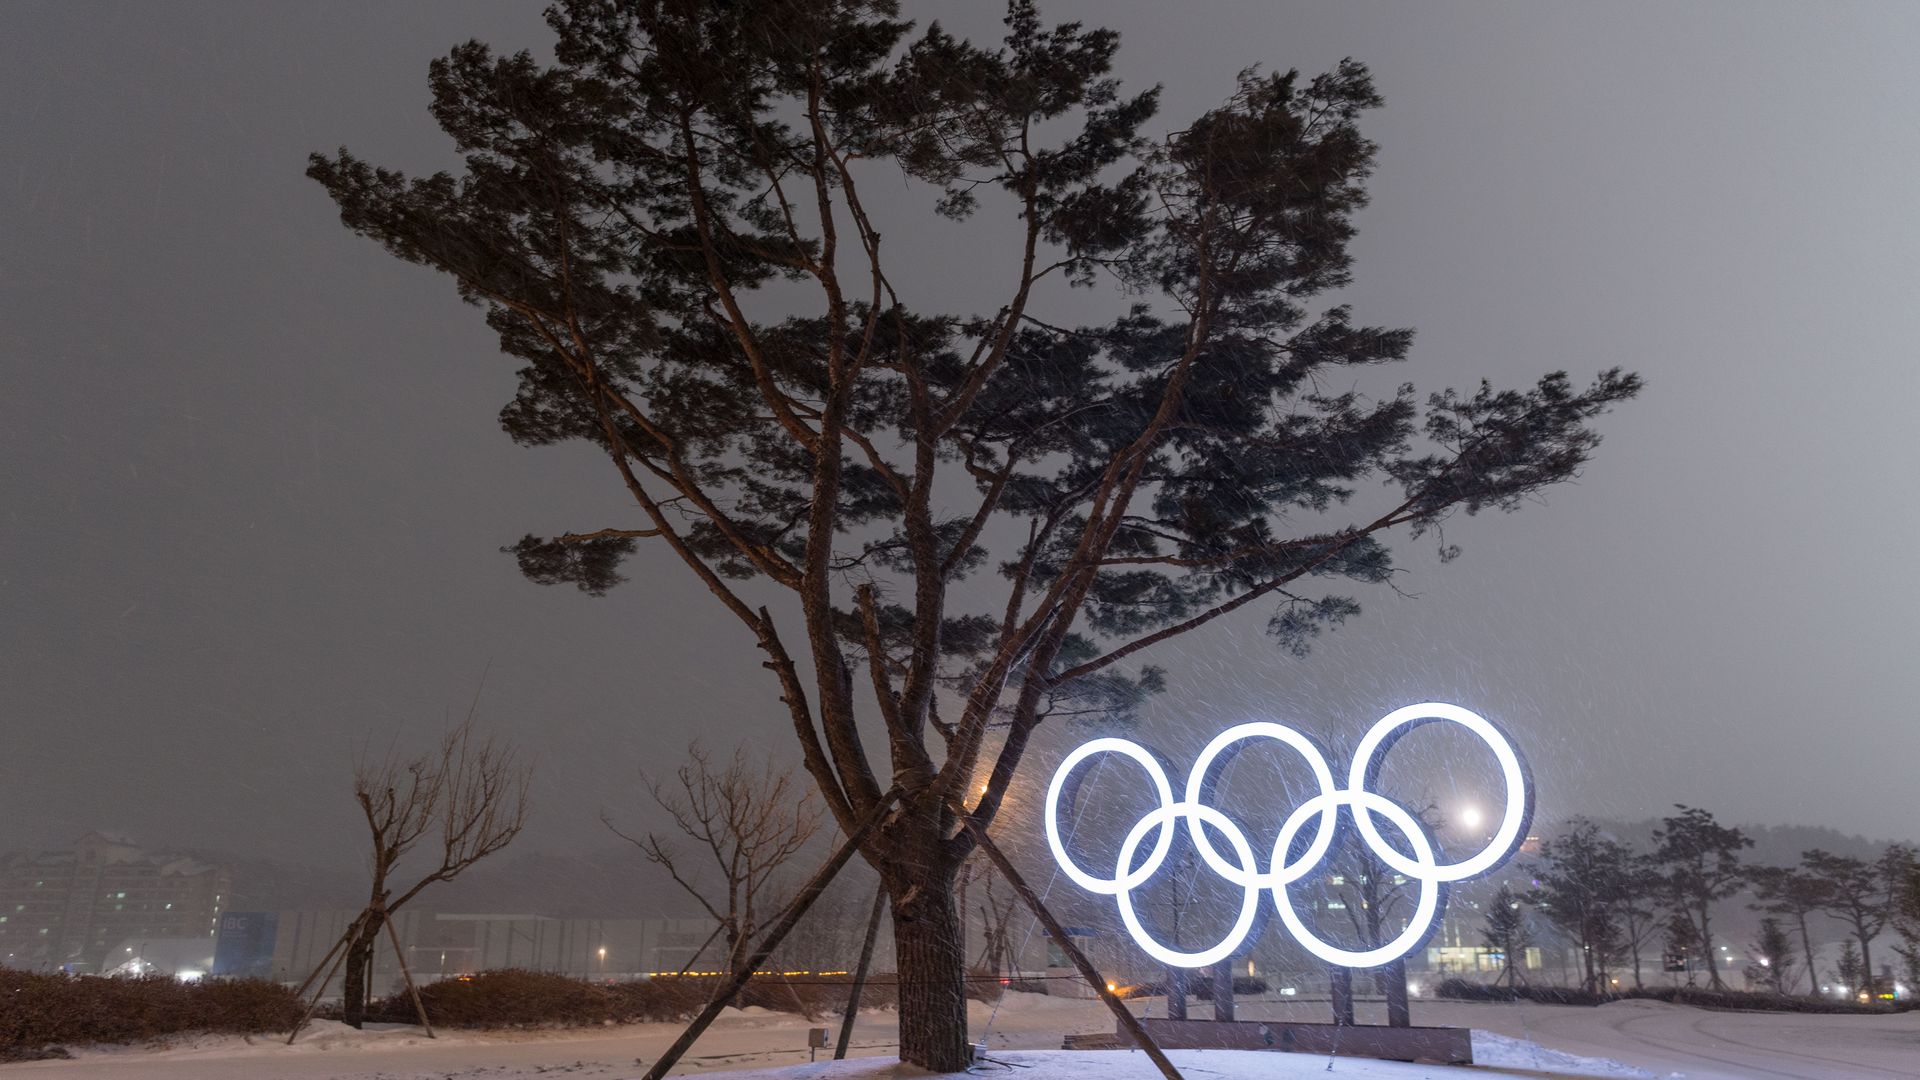 The Olympic rings as snow falls